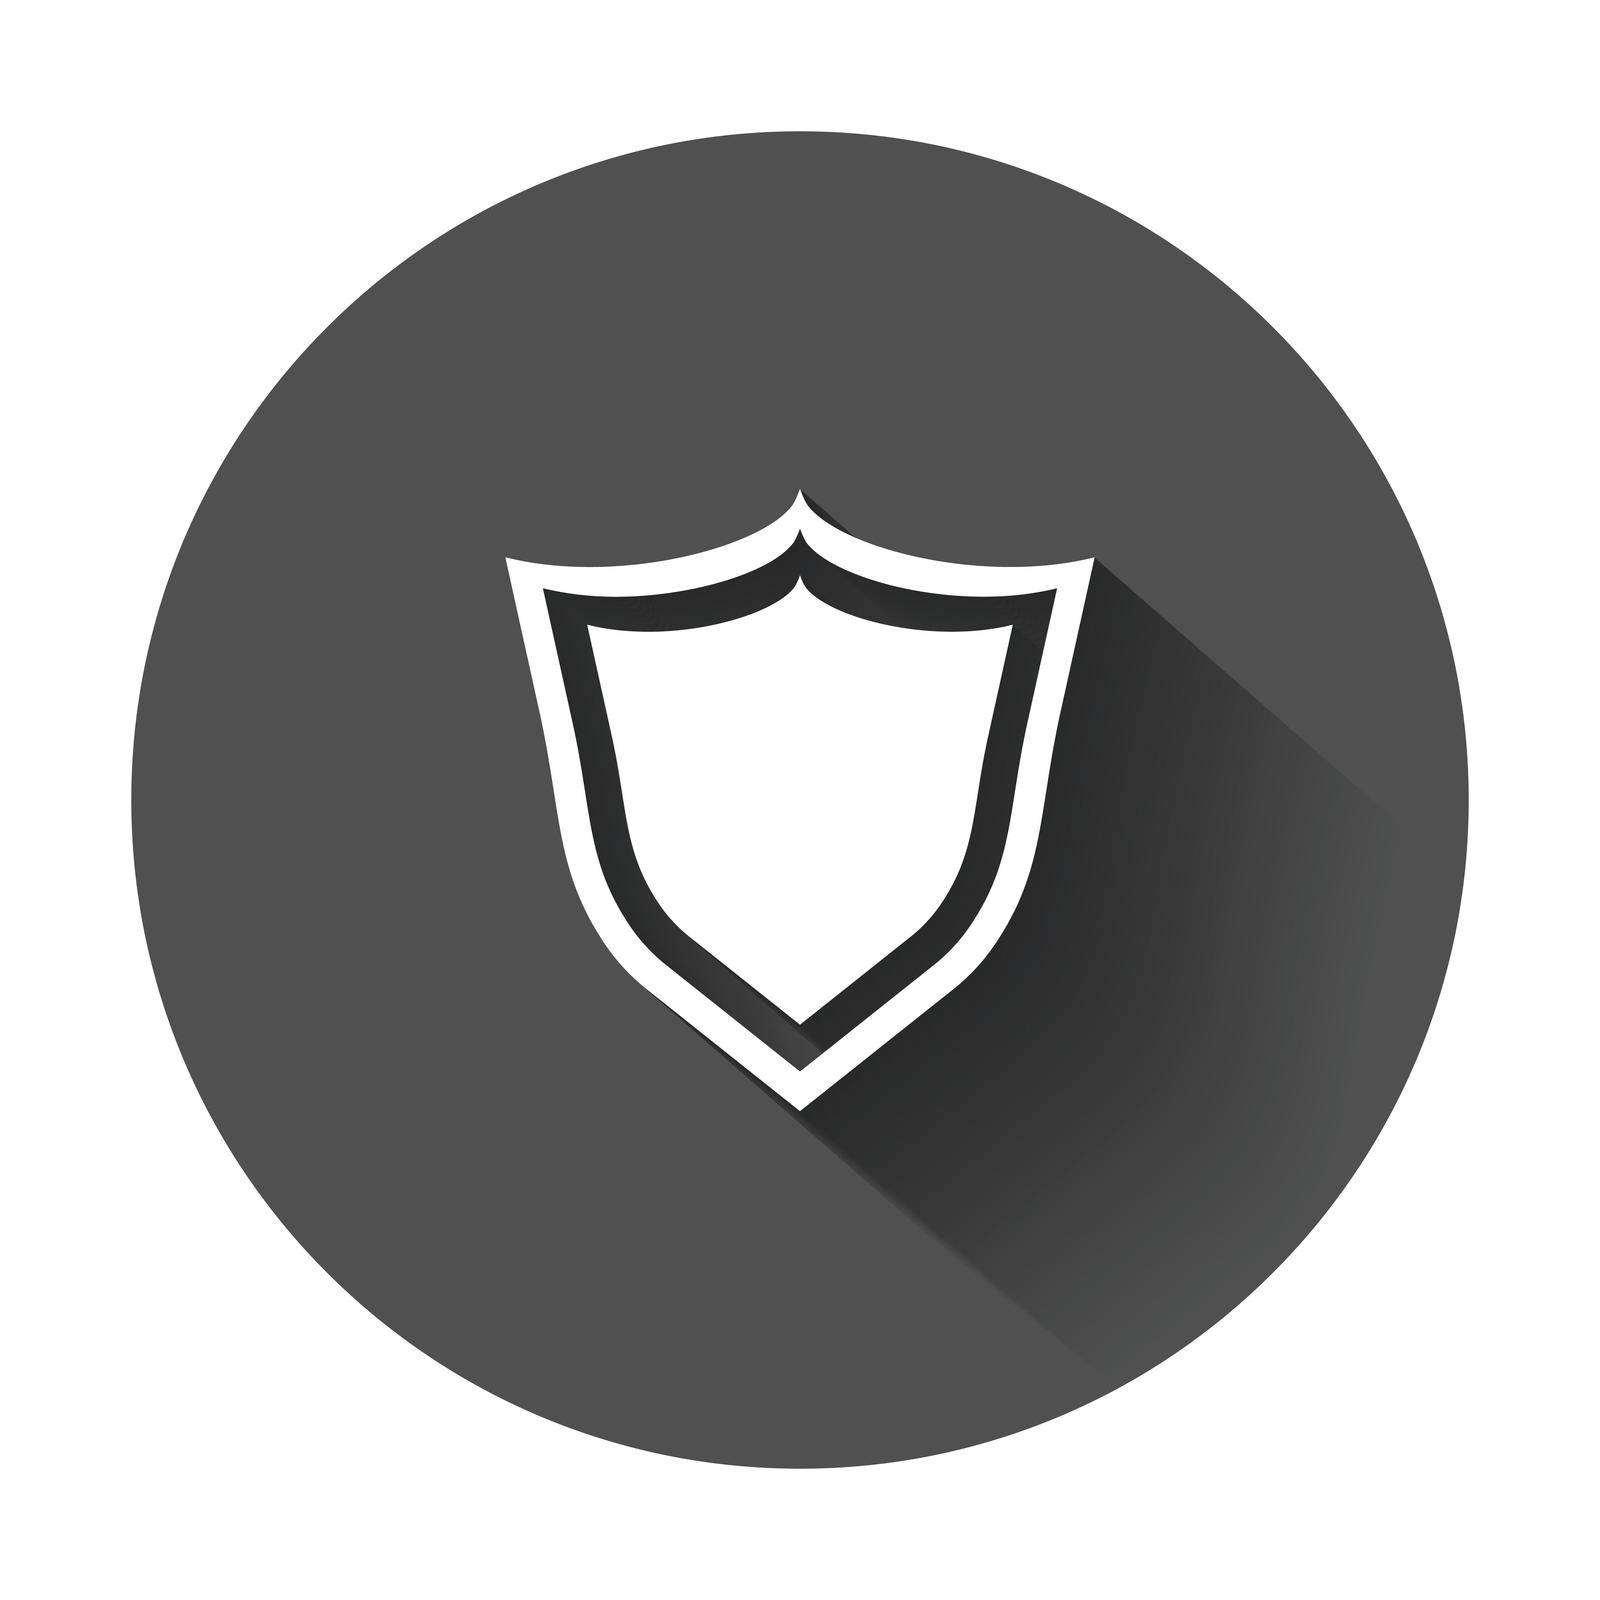 Shield protection icon. Vector illustration in flat style with long shadow.